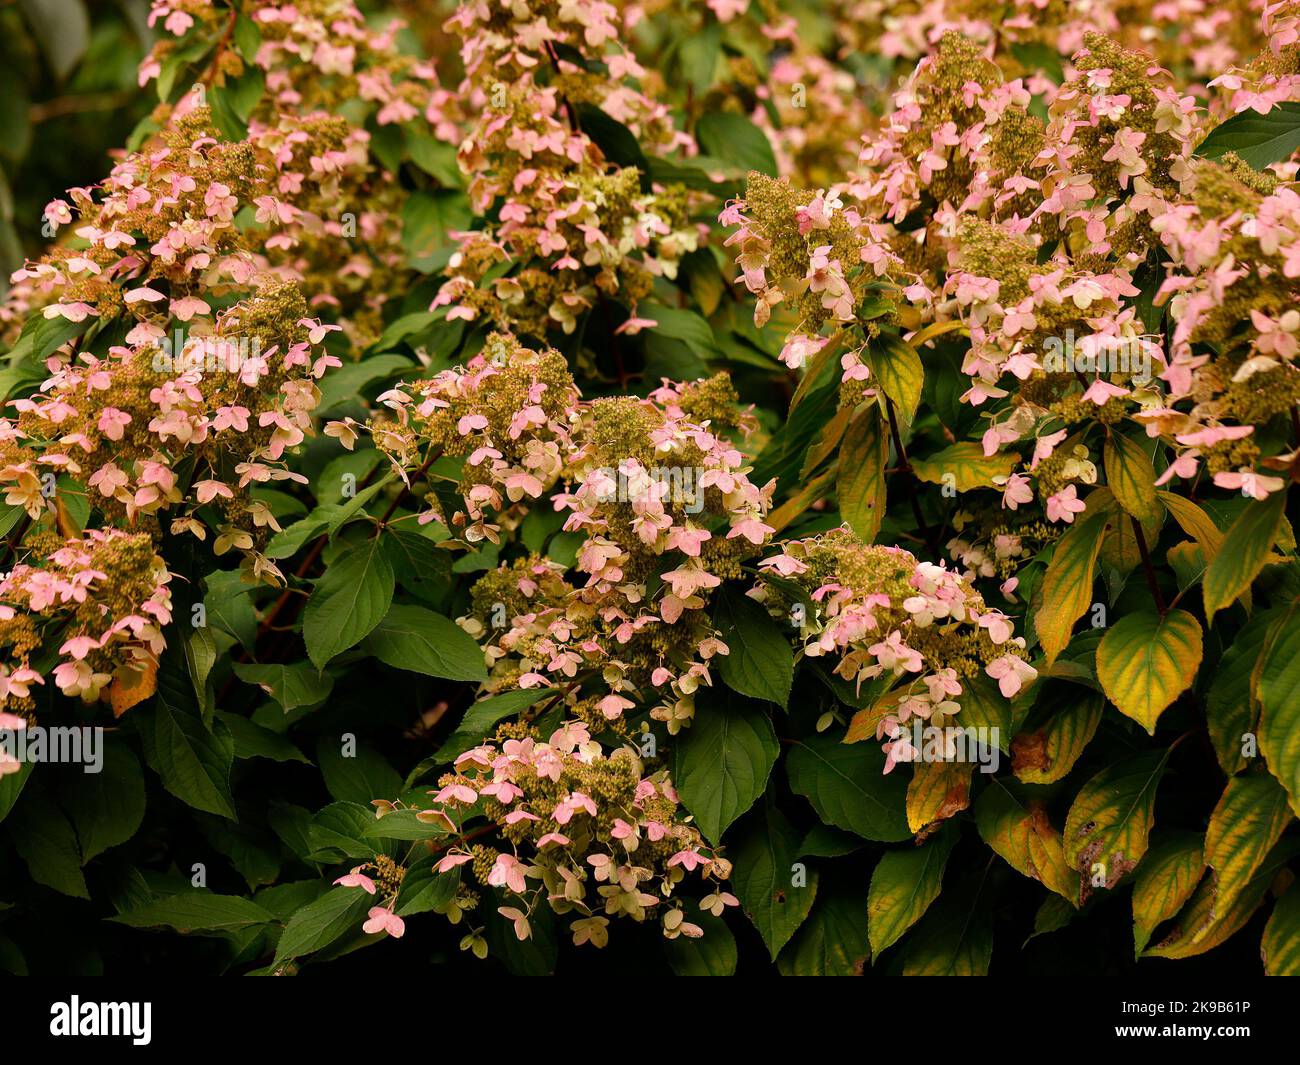 Close up of the flower head of the deciduous perennial garden plant Hydrangea paniculata Last Post seen in autumn. Stock Photo